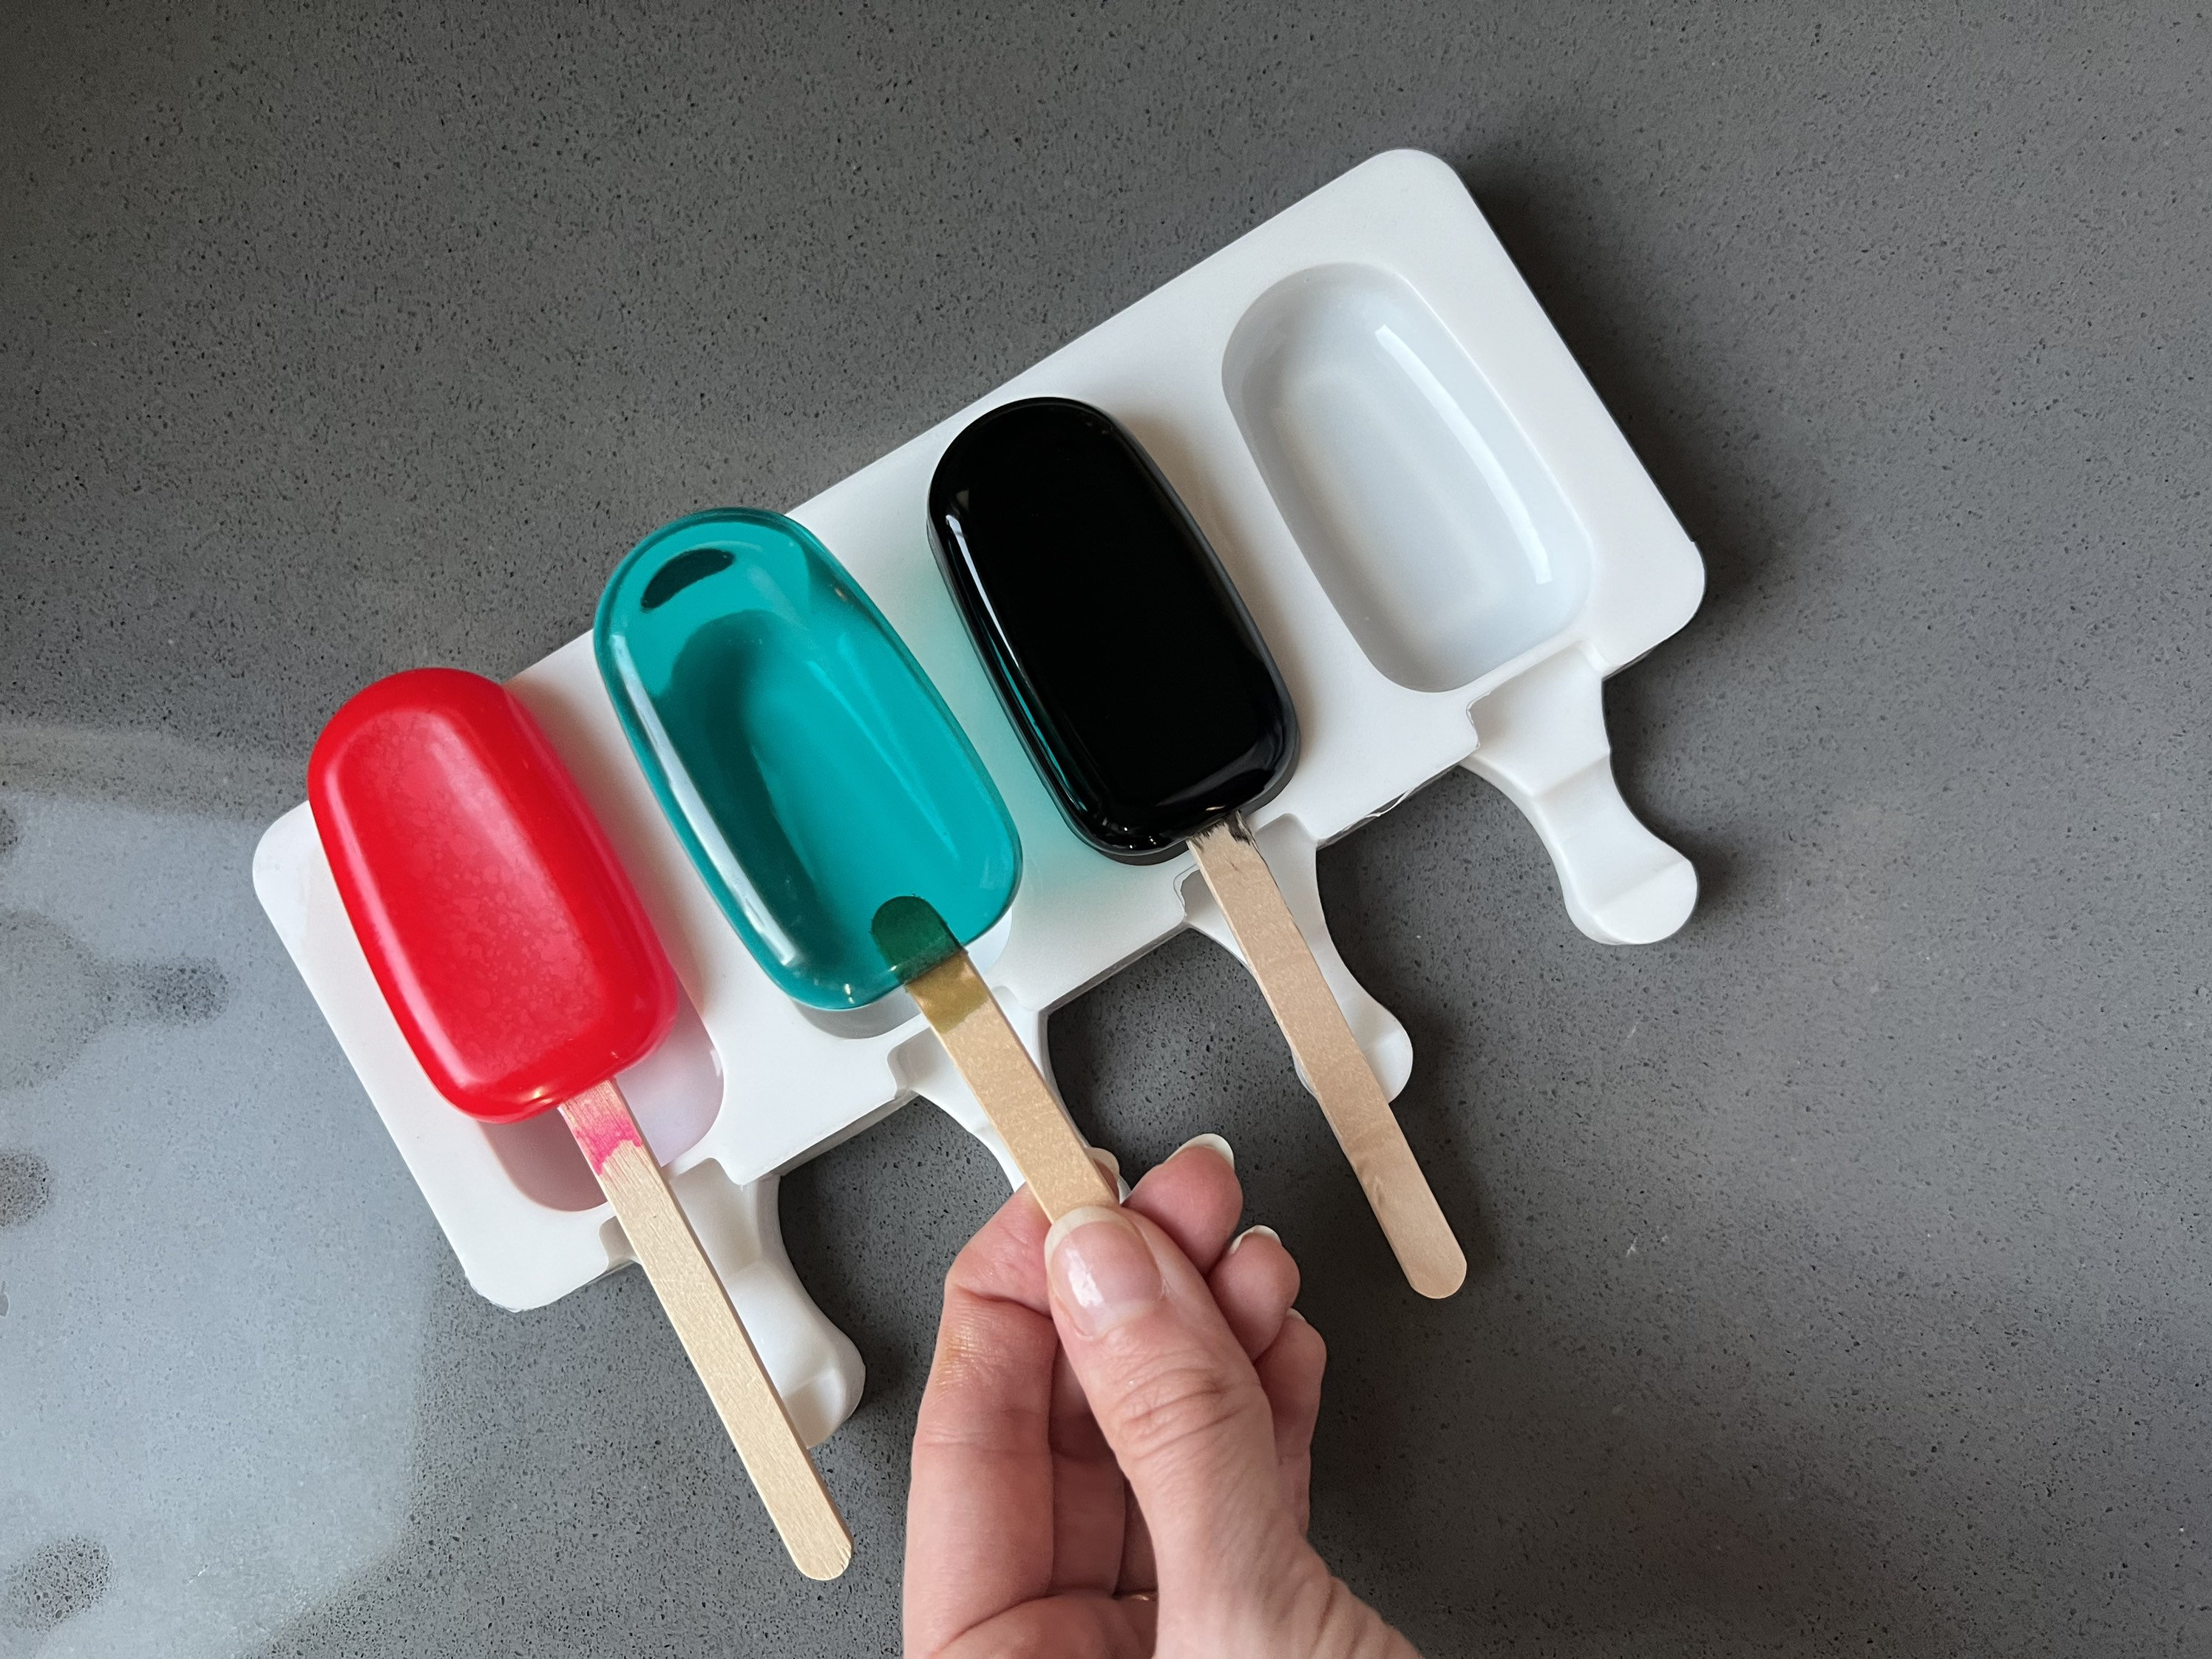 Melted Ice Pop, Candy Shape Resin Molds – Let's Resin